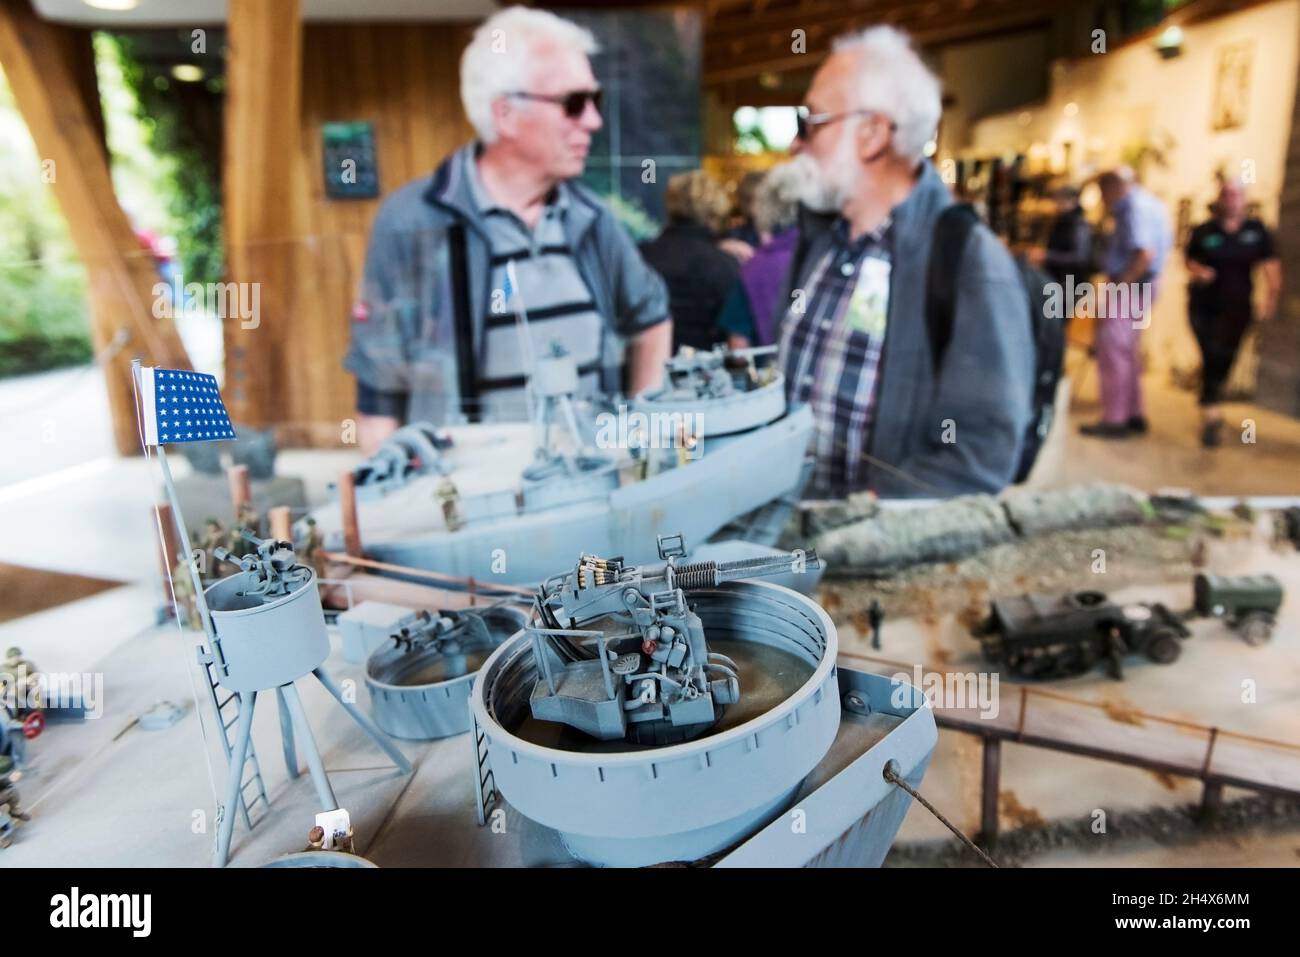 People discussing a diorama exhibit commemorating the 29th Infantry Division embarking from Trebah Garden Polgwidden Beach for the D-Day landings in W Stock Photo